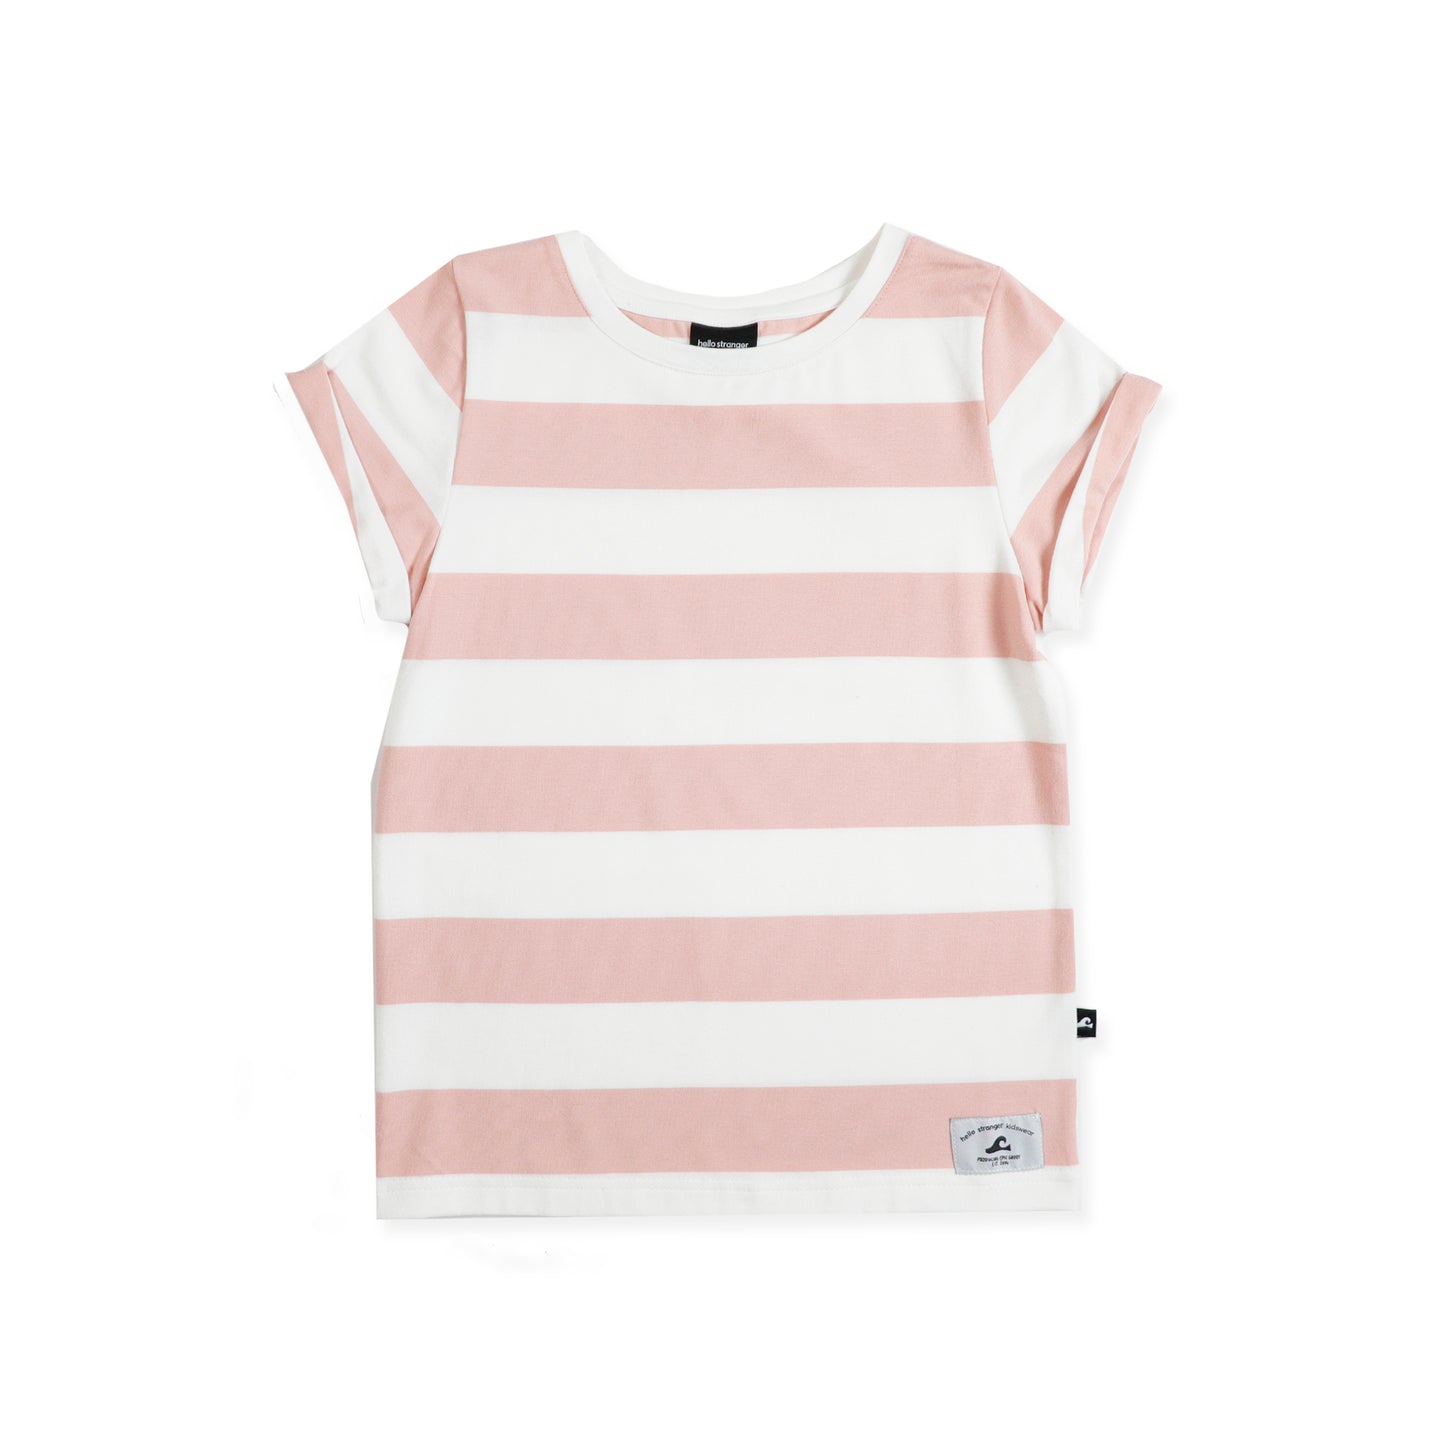 Girls Classic Striped Tee -  Pink - 2y